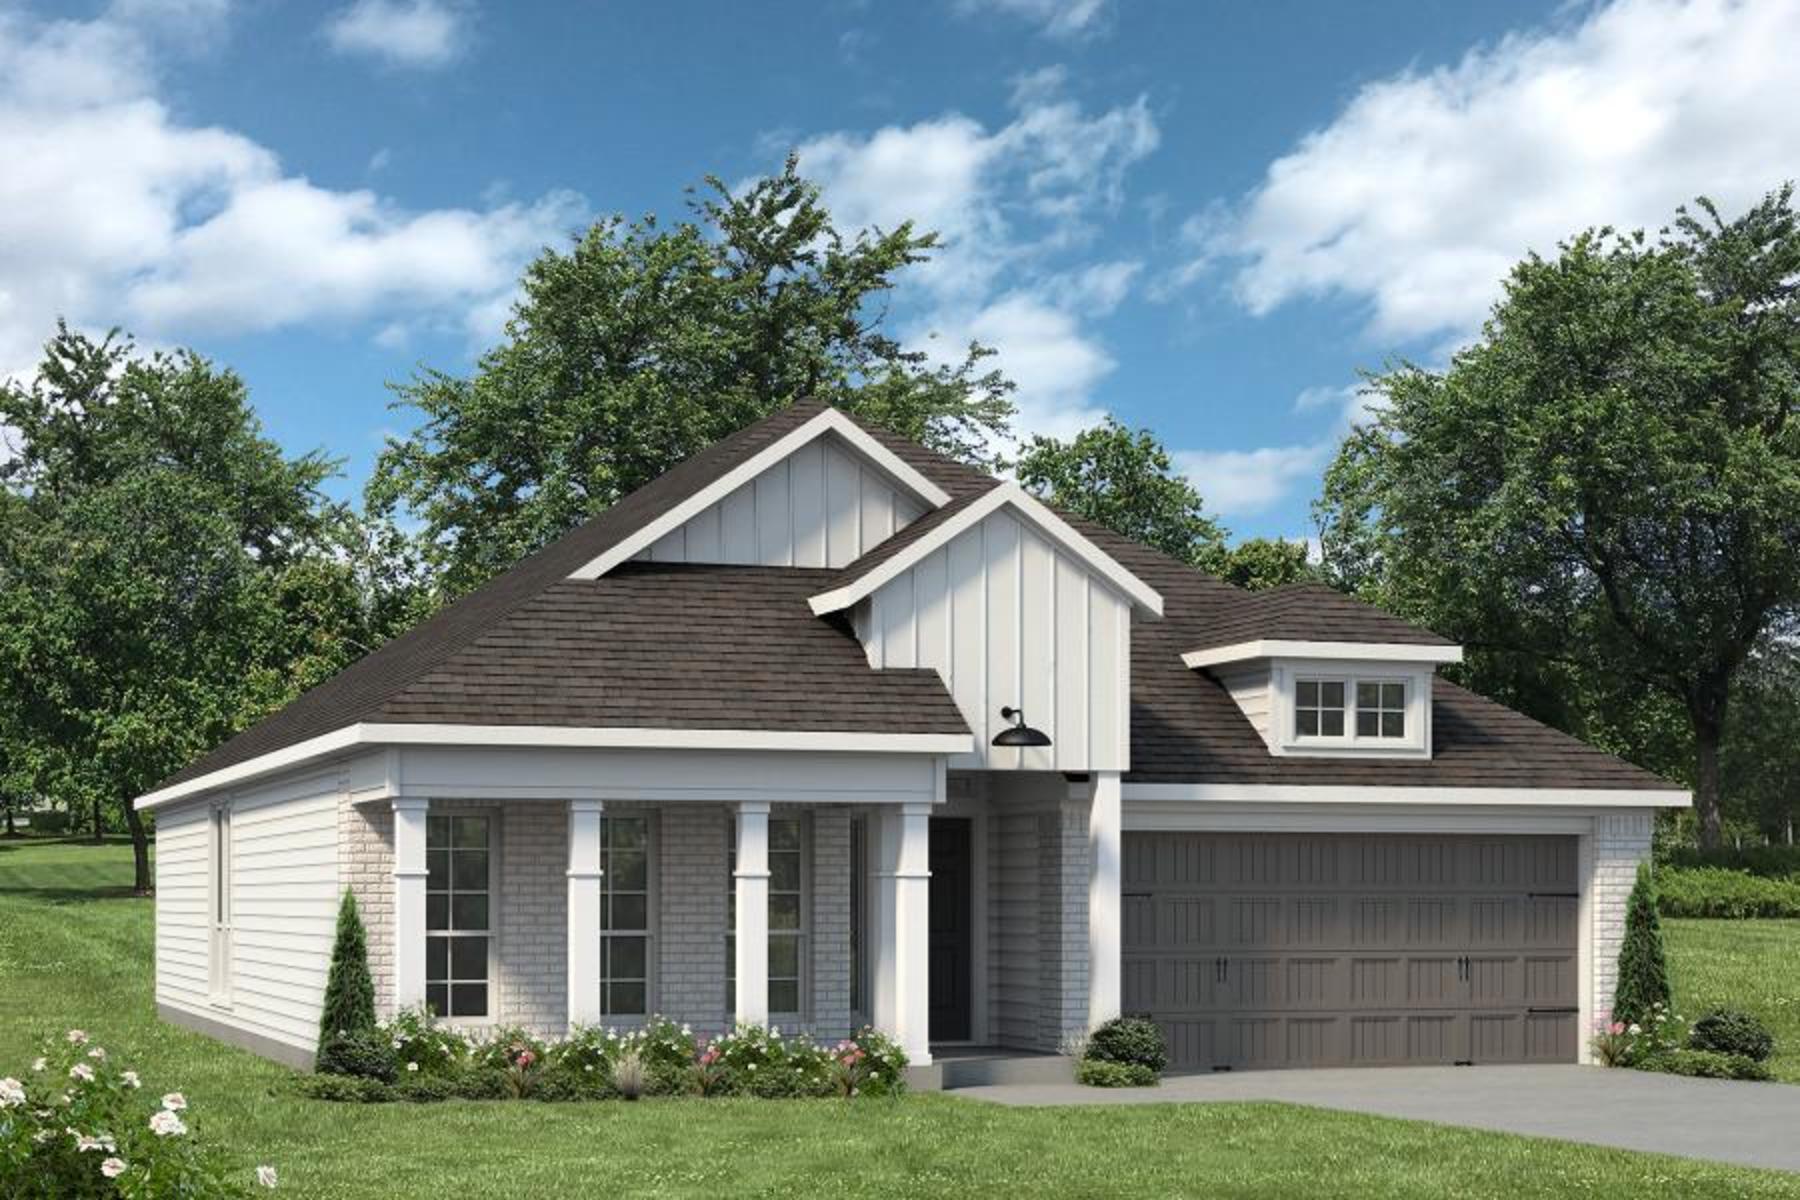 https://myhome.anewgo.com/client/stylecraft/community/Our%20Plans/plan/Sloan?elevId=76. Sloane Home with 3 Bedrooms